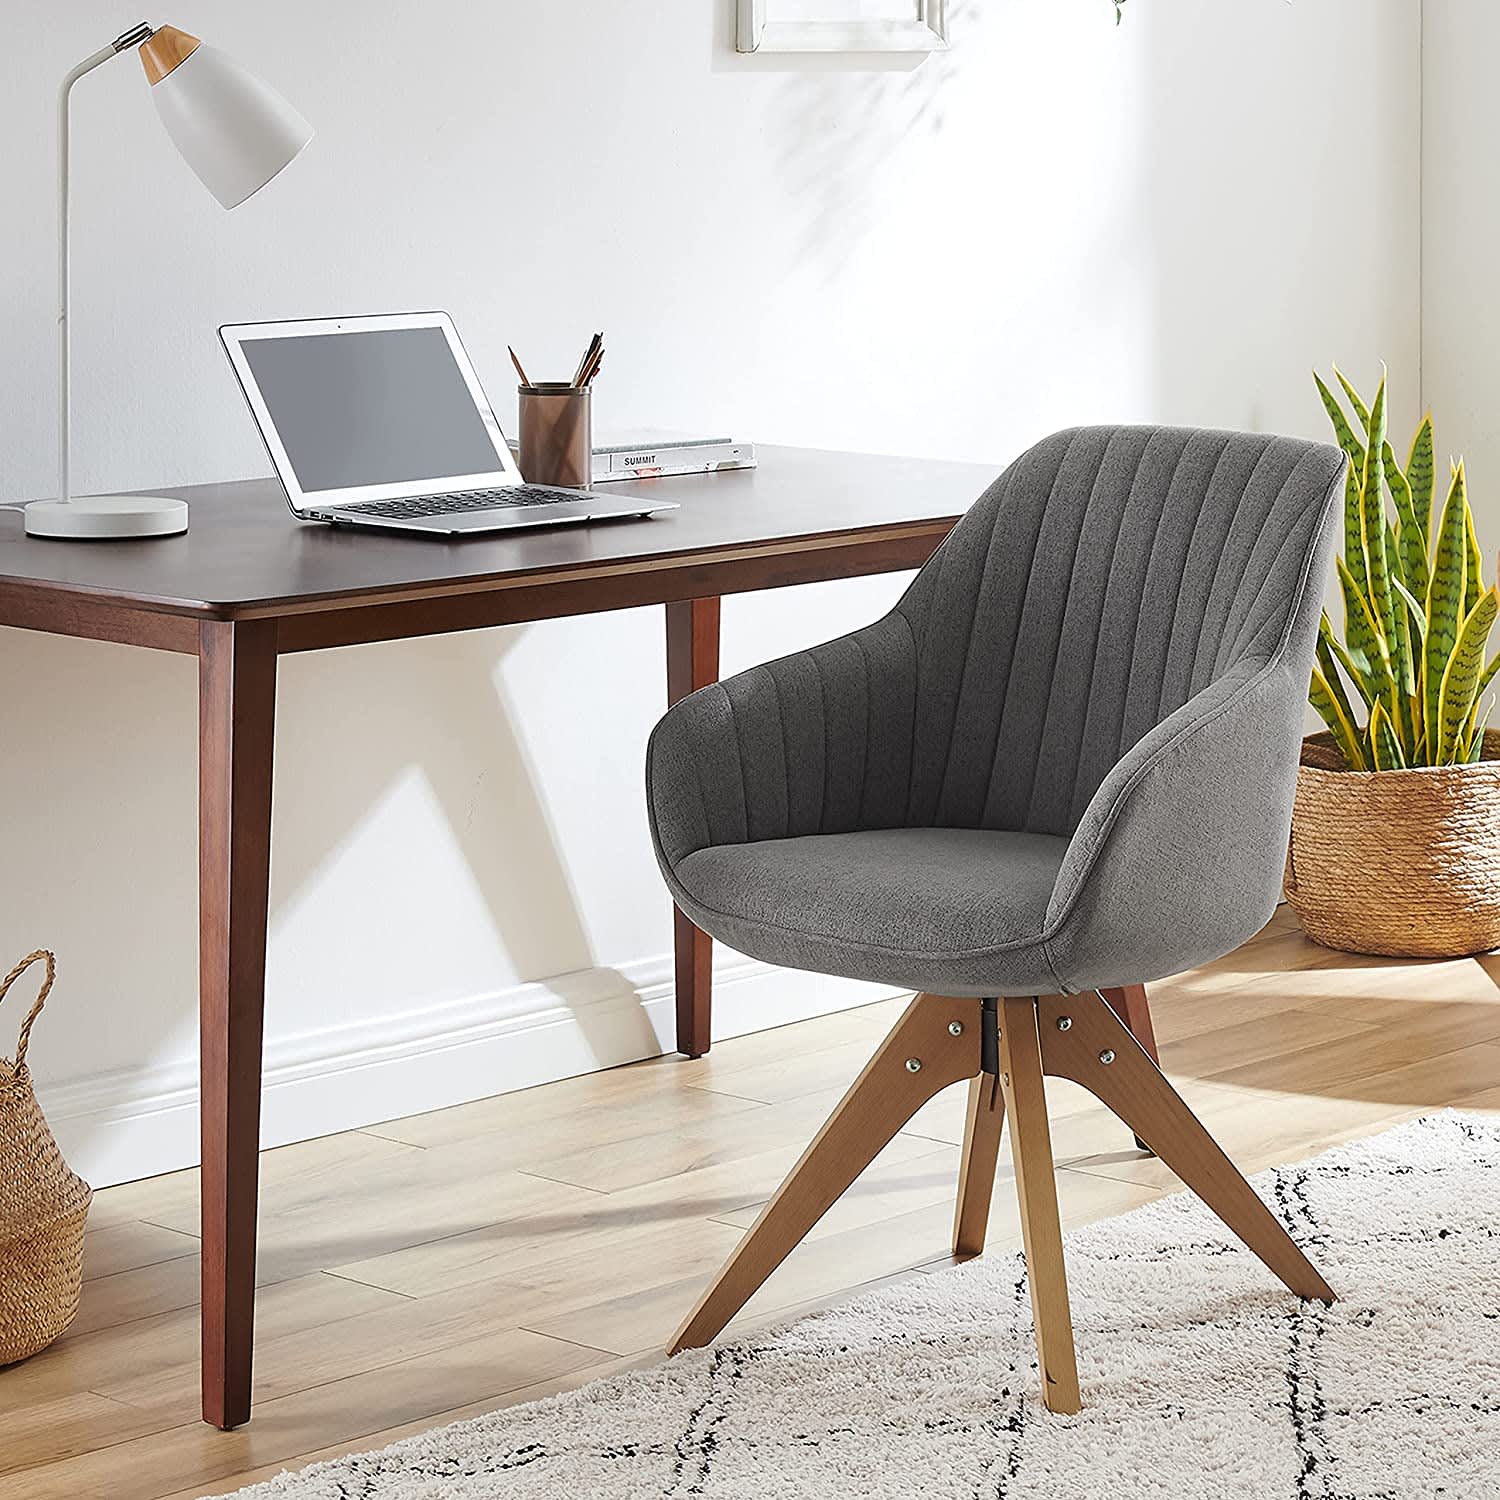 An office chair to work from home